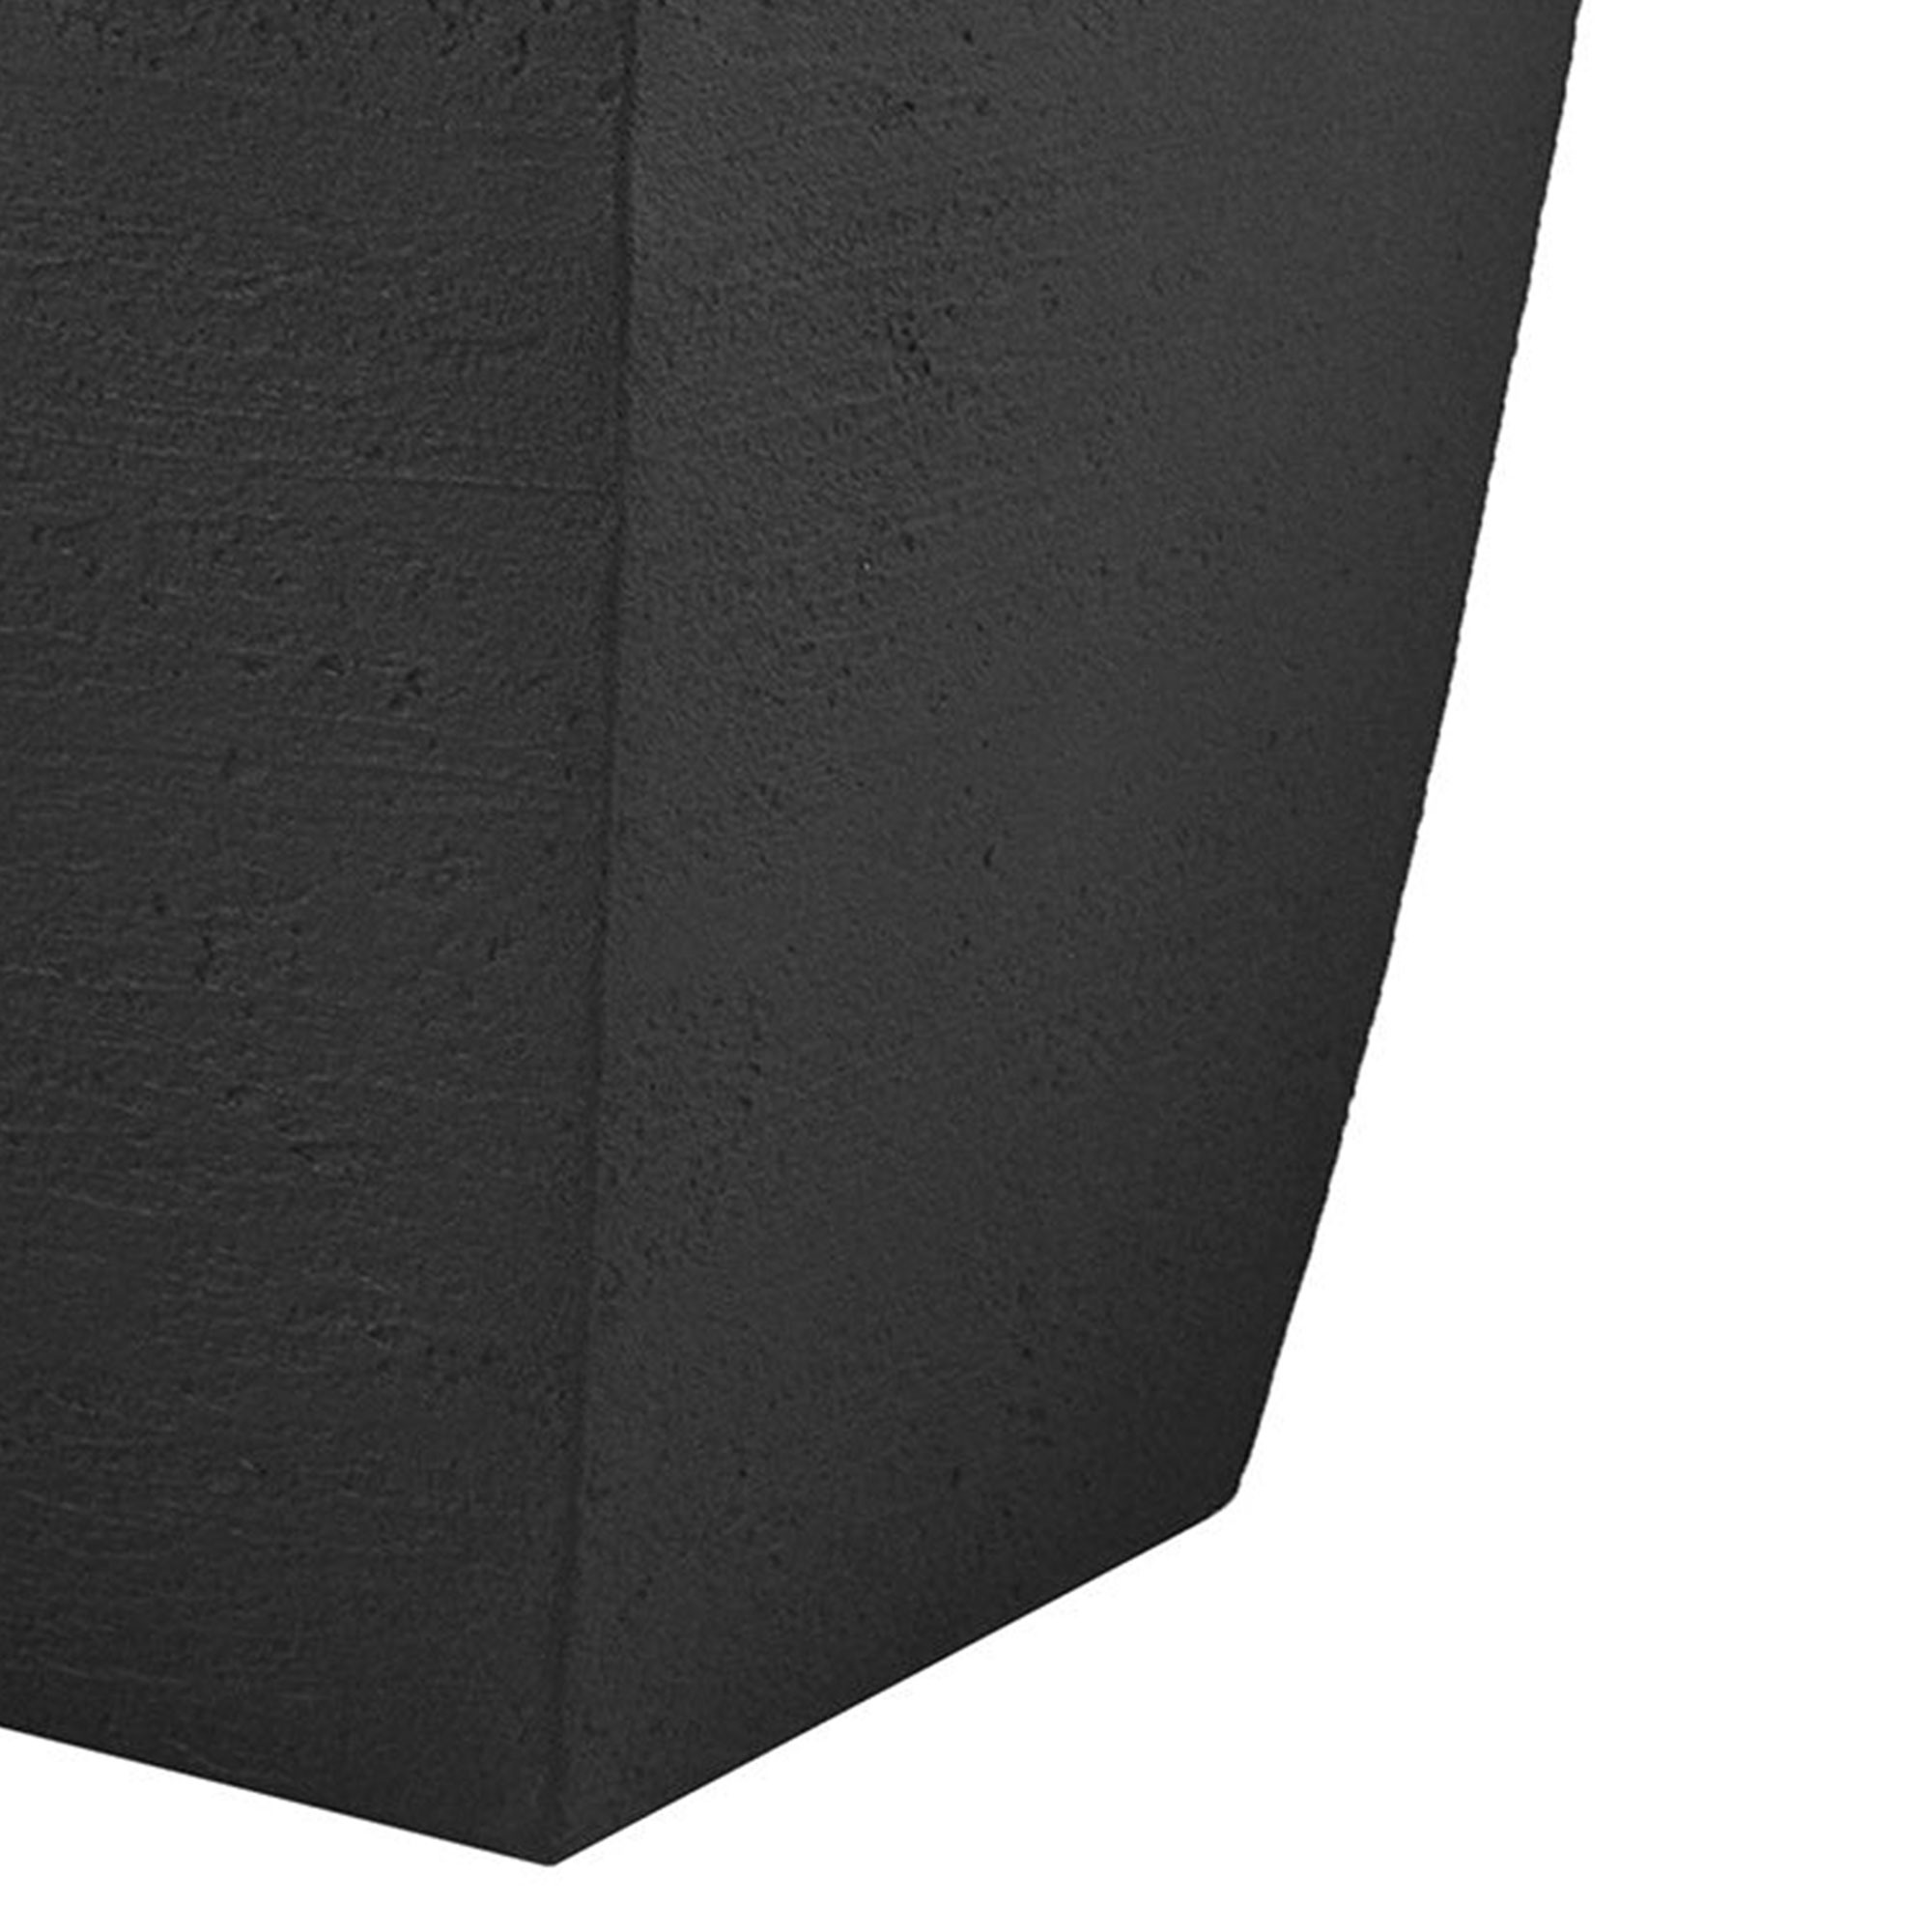 Tusco Products Modern 19 Inch Molded Plastic Square Planter, Black - image 4 of 5